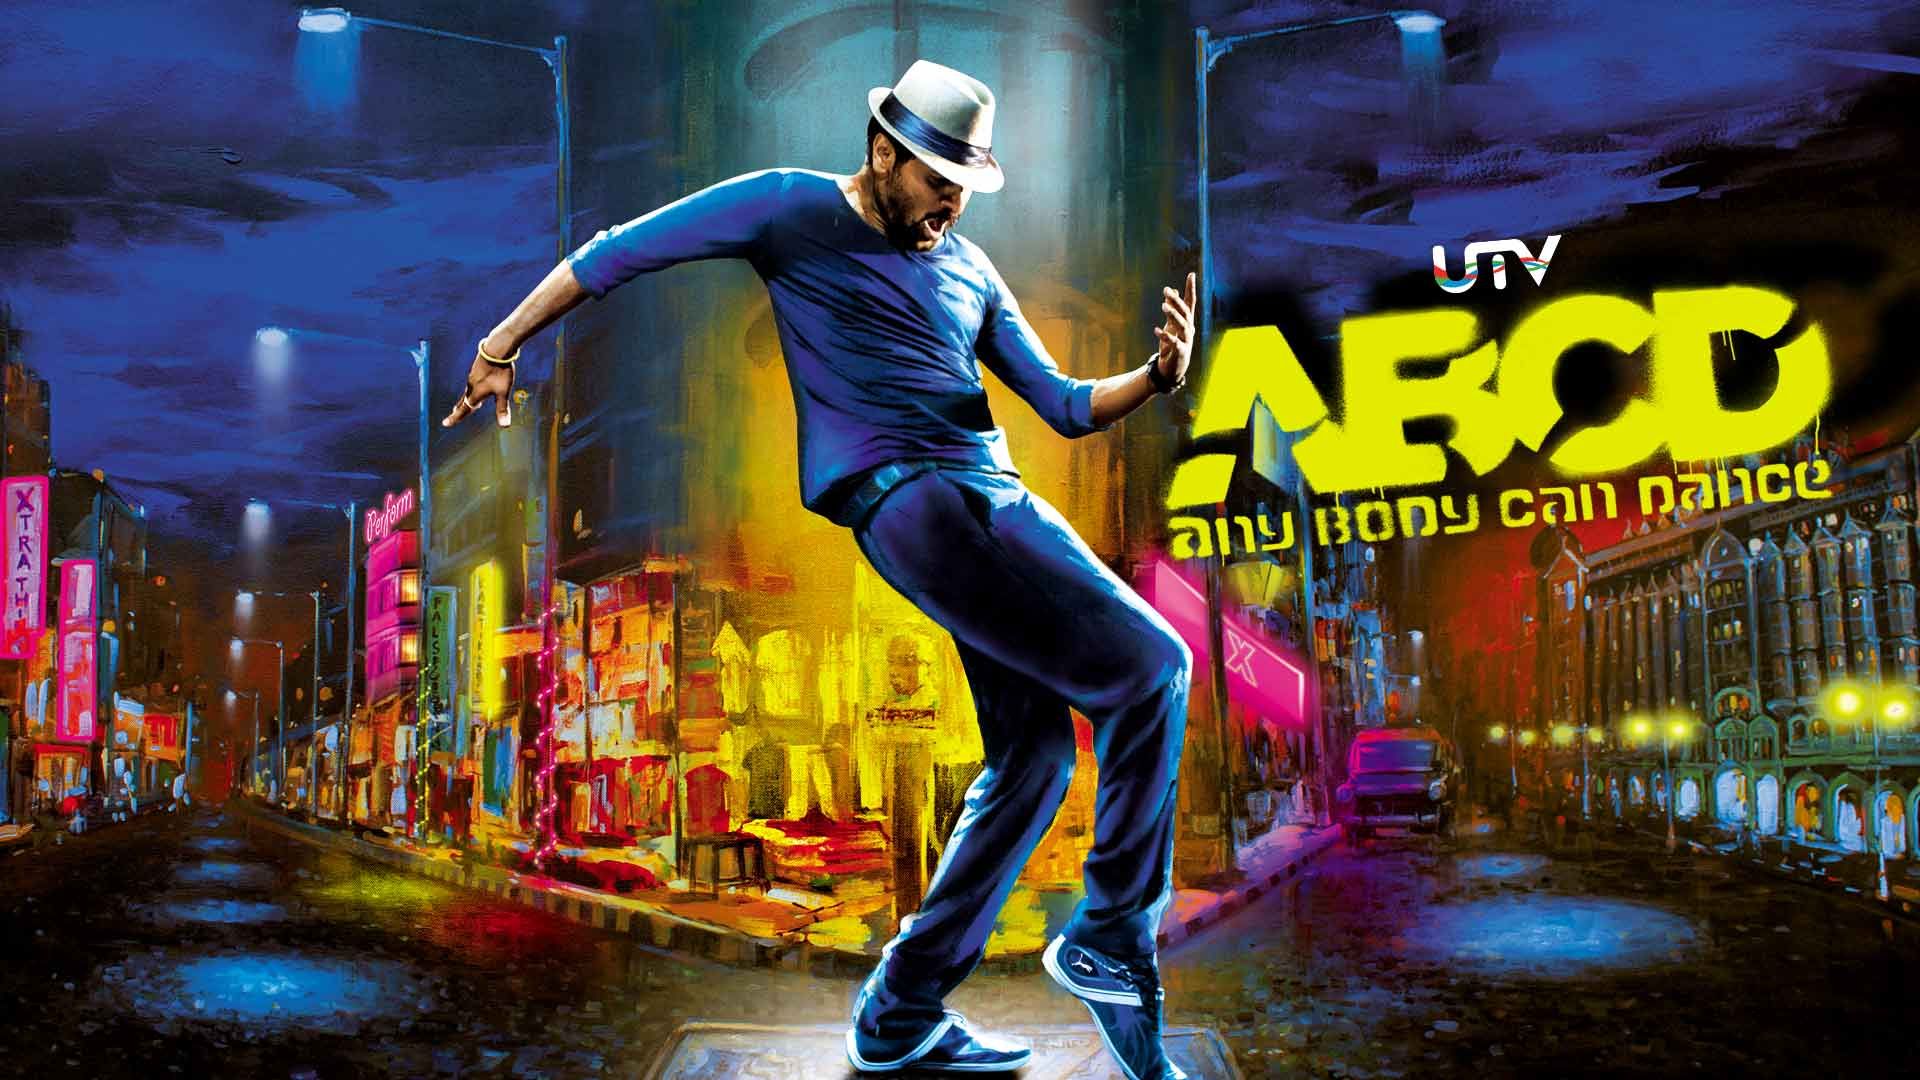 abcd 2 2015 full movie hd torrent